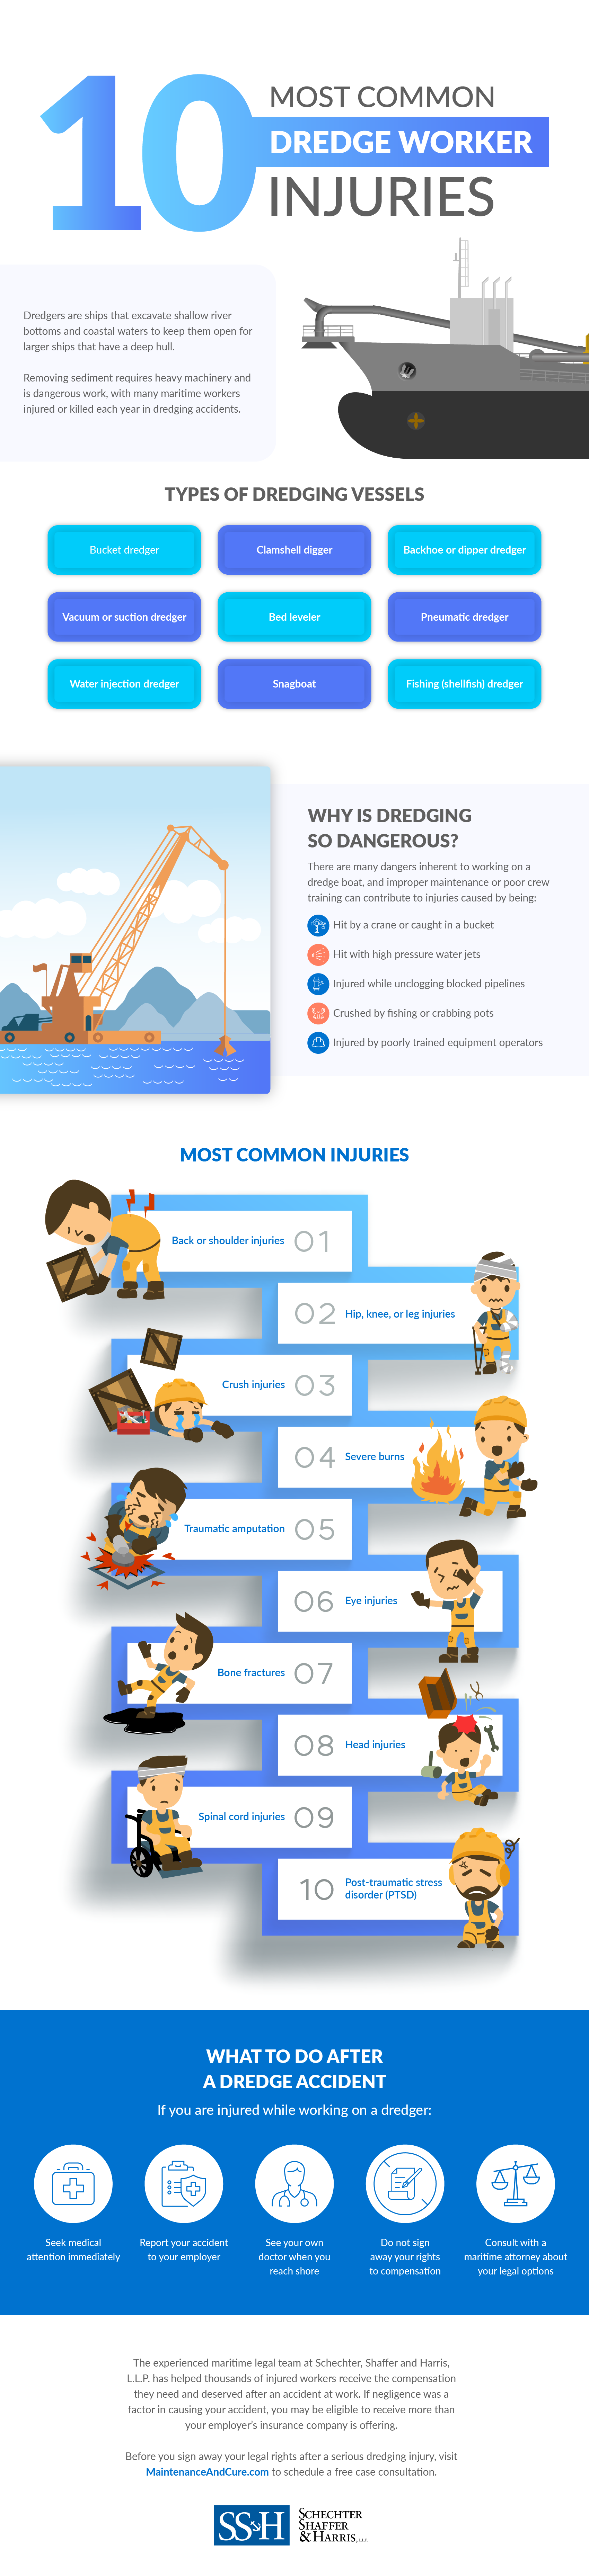 10 Most Common Dredge Worker Injuries